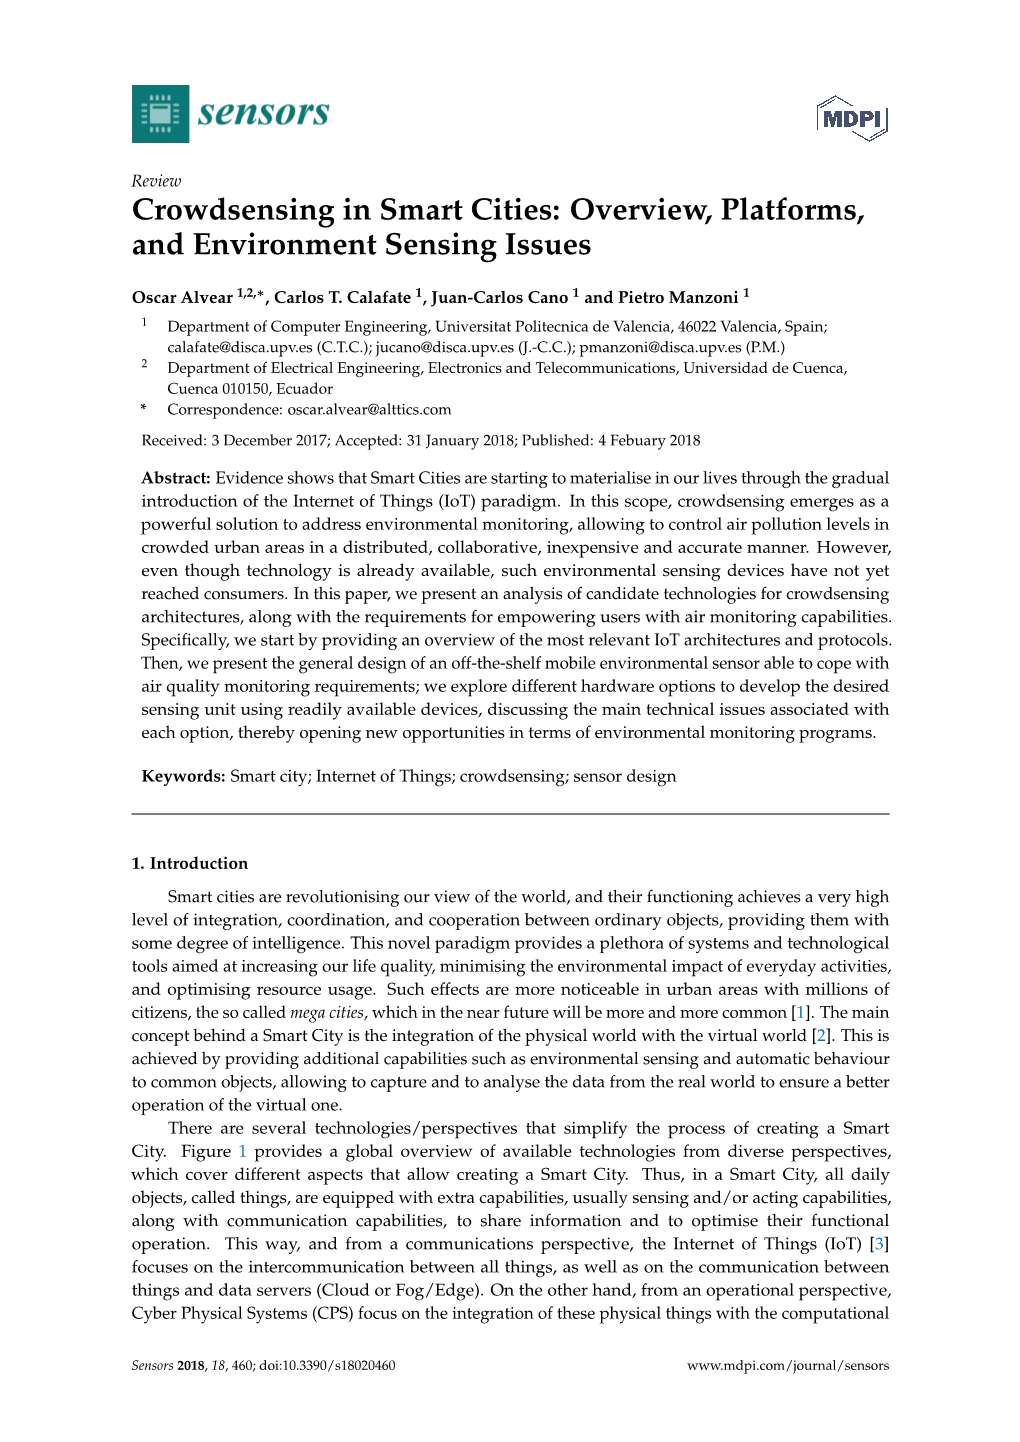 Crowdsensing in Smart Cities: Overview, Platforms, and Environment Sensing Issues